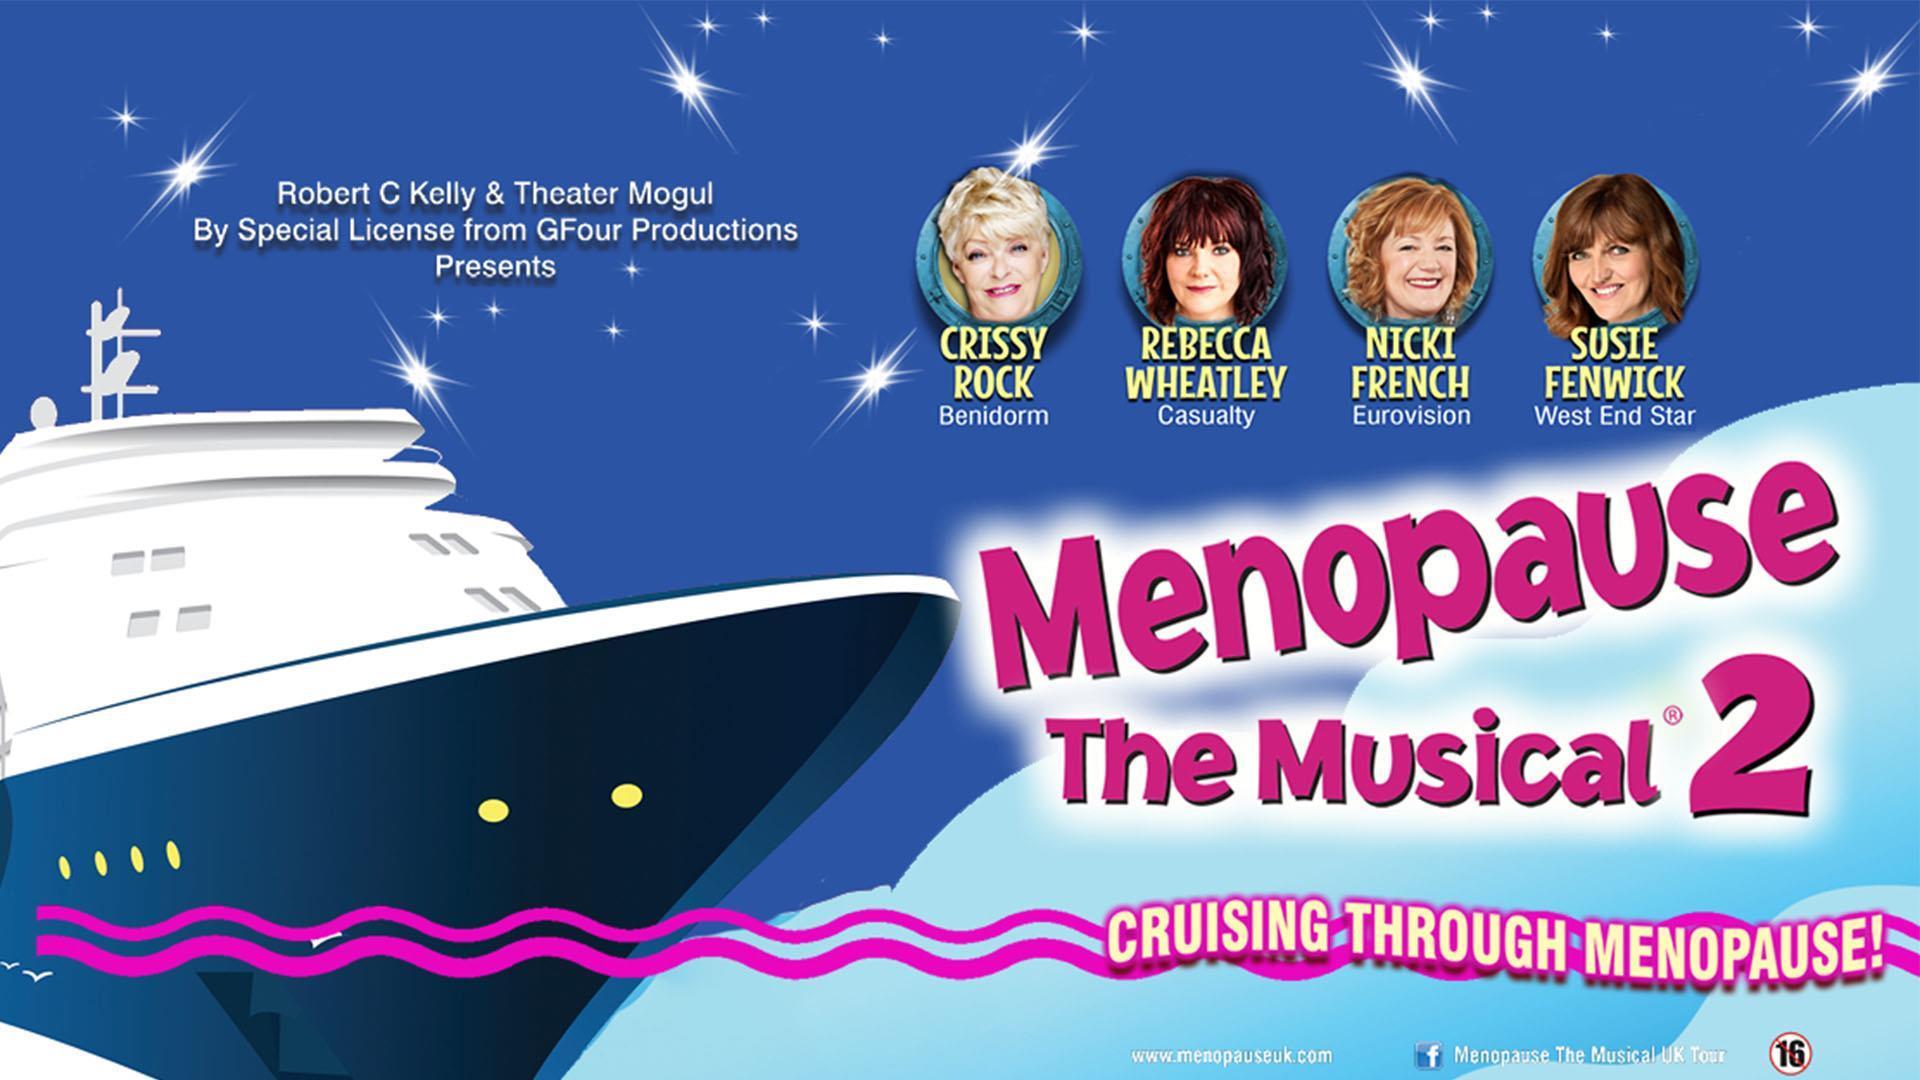 Menopause The Musical 2 